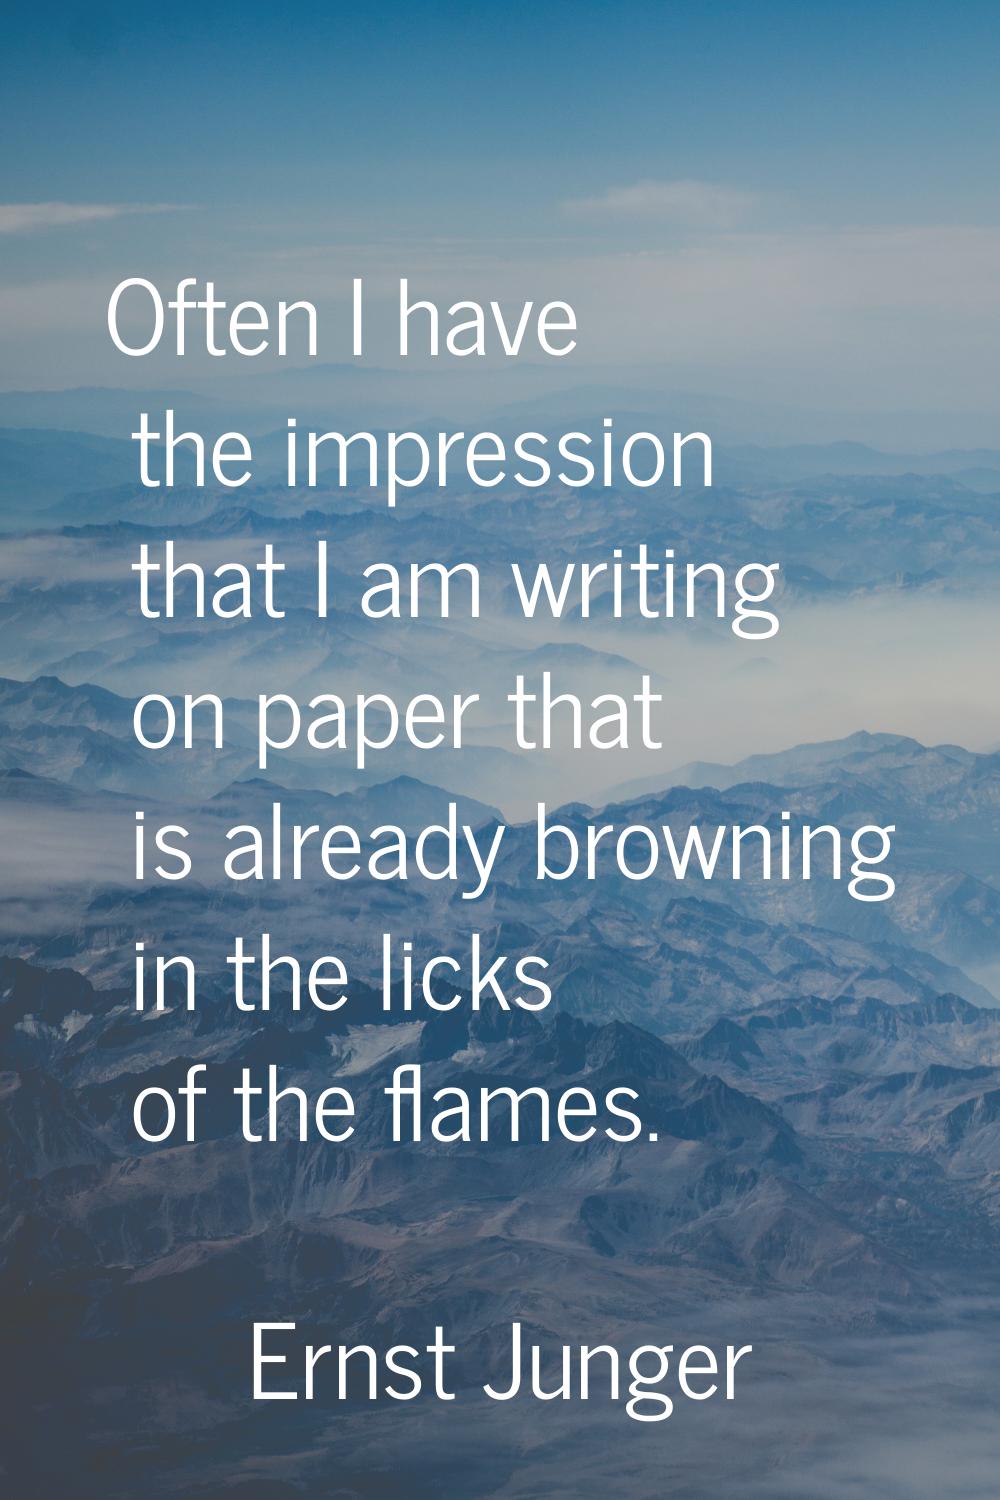 Often I have the impression that I am writing on paper that is already browning in the licks of the